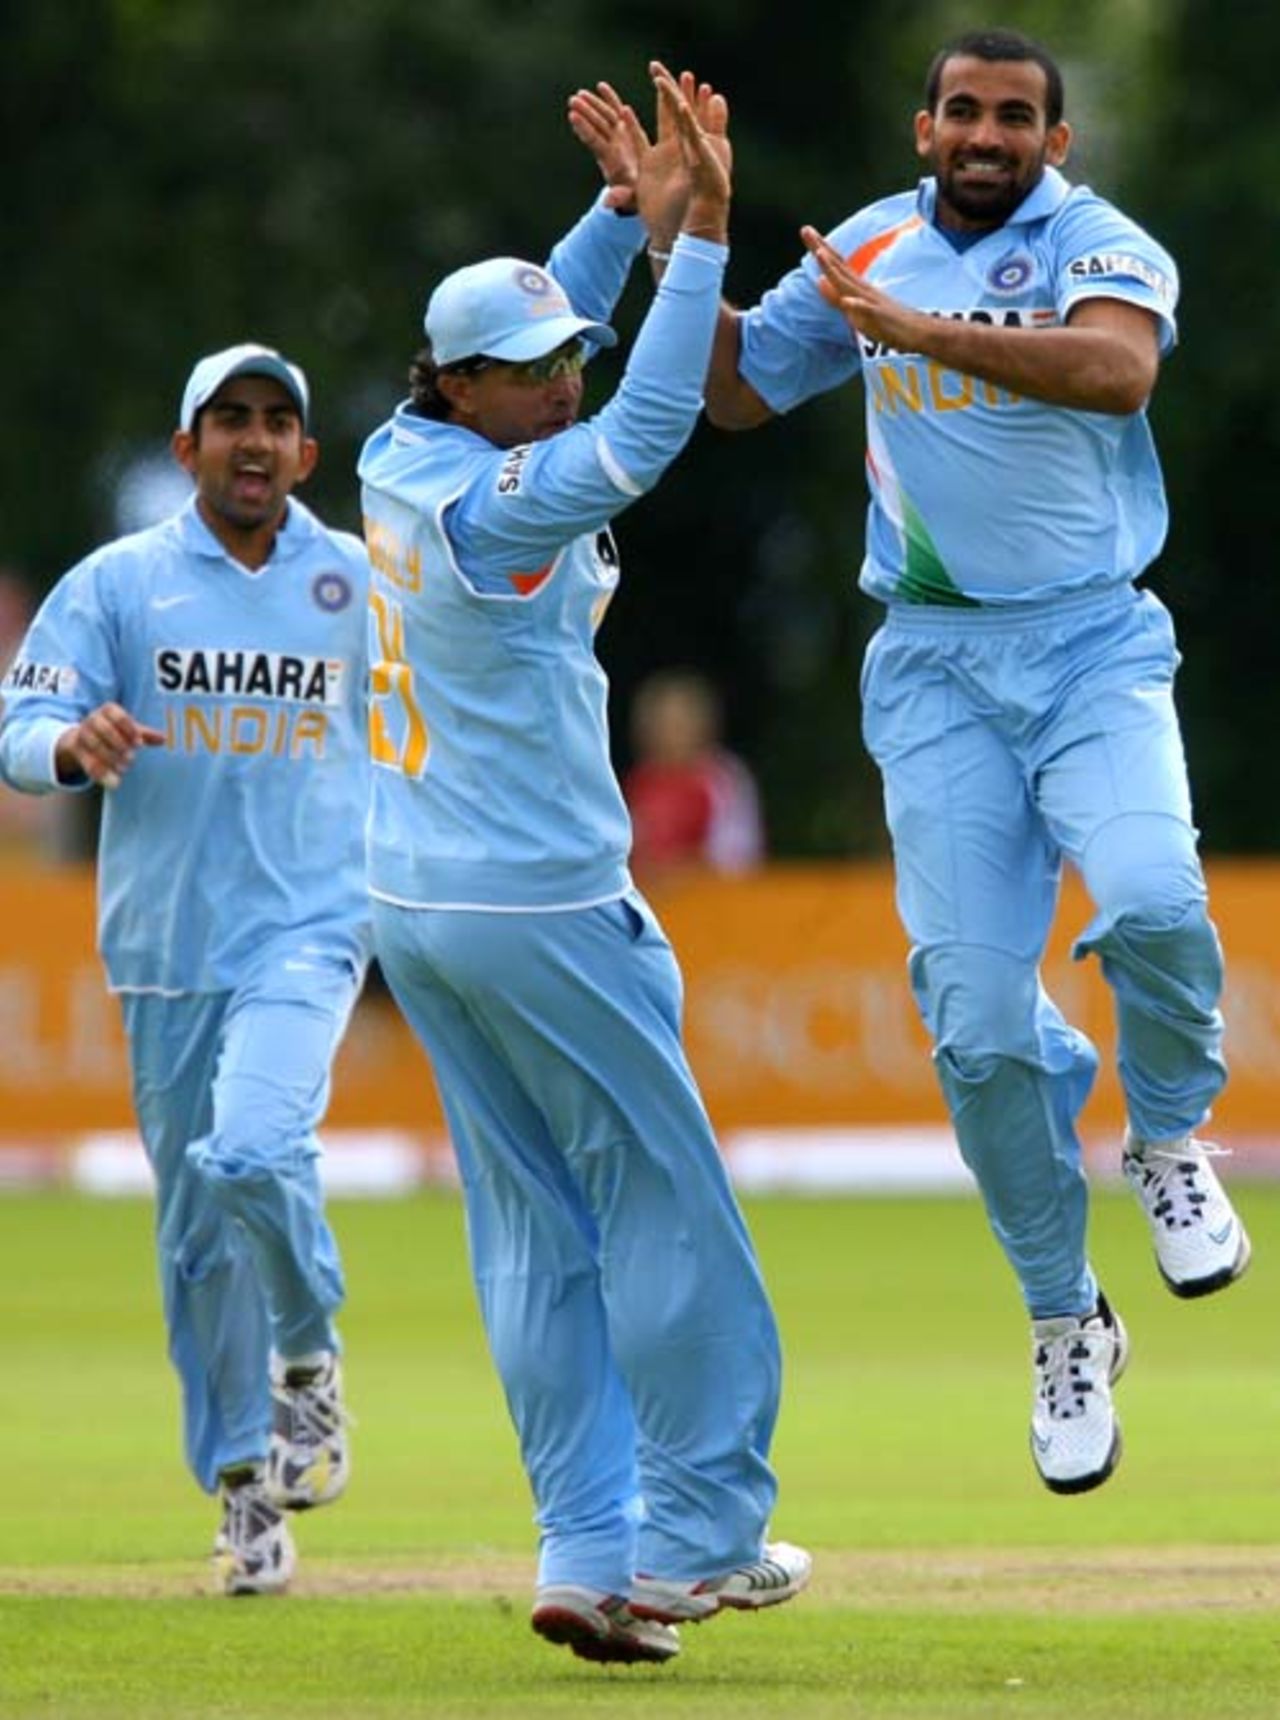 Zaheer Khan and Sourav Ganguly celebrate a strike but the appeal was turned down much to India's dismay, India v South Africa, 3rd ODI, Belfast, July 1, 2007